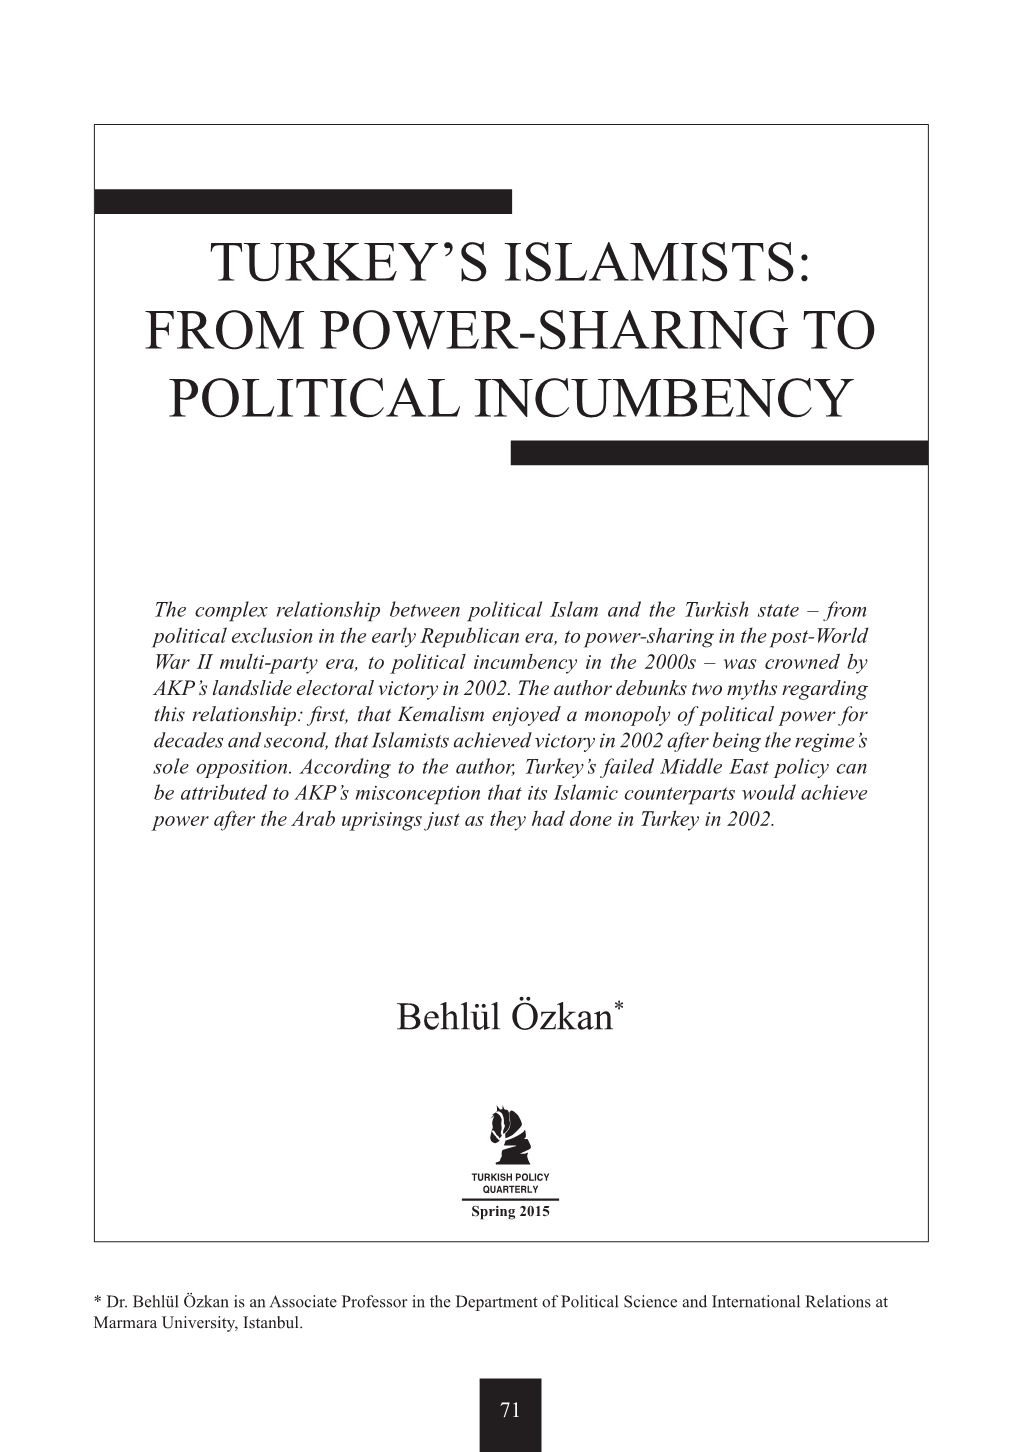 Turkey's Islamists: from Power-Sharing to Political